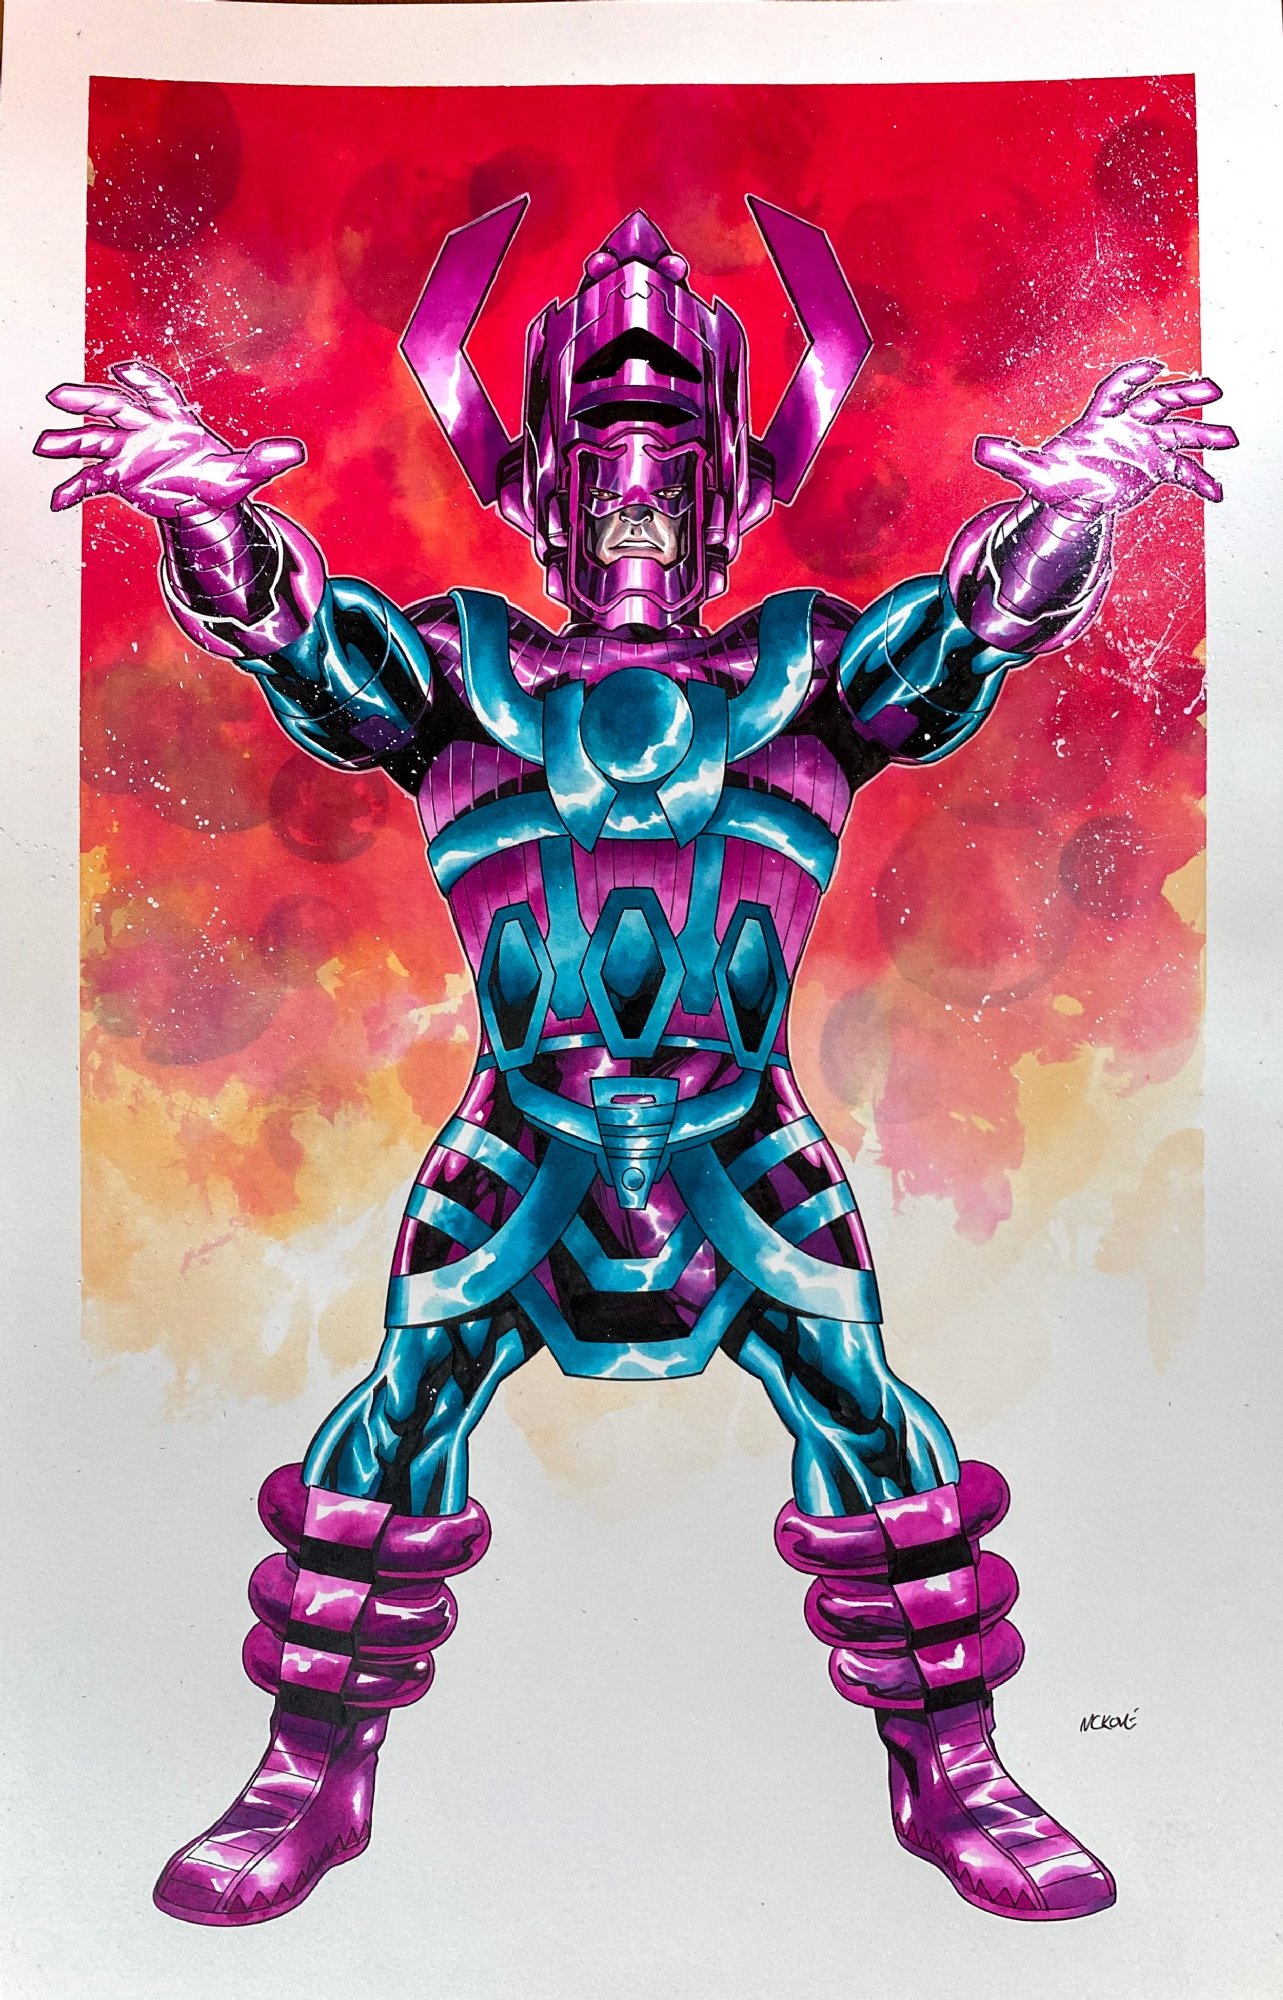 Galactus Illustration by Mike McKone, in E S's Public Collection (some